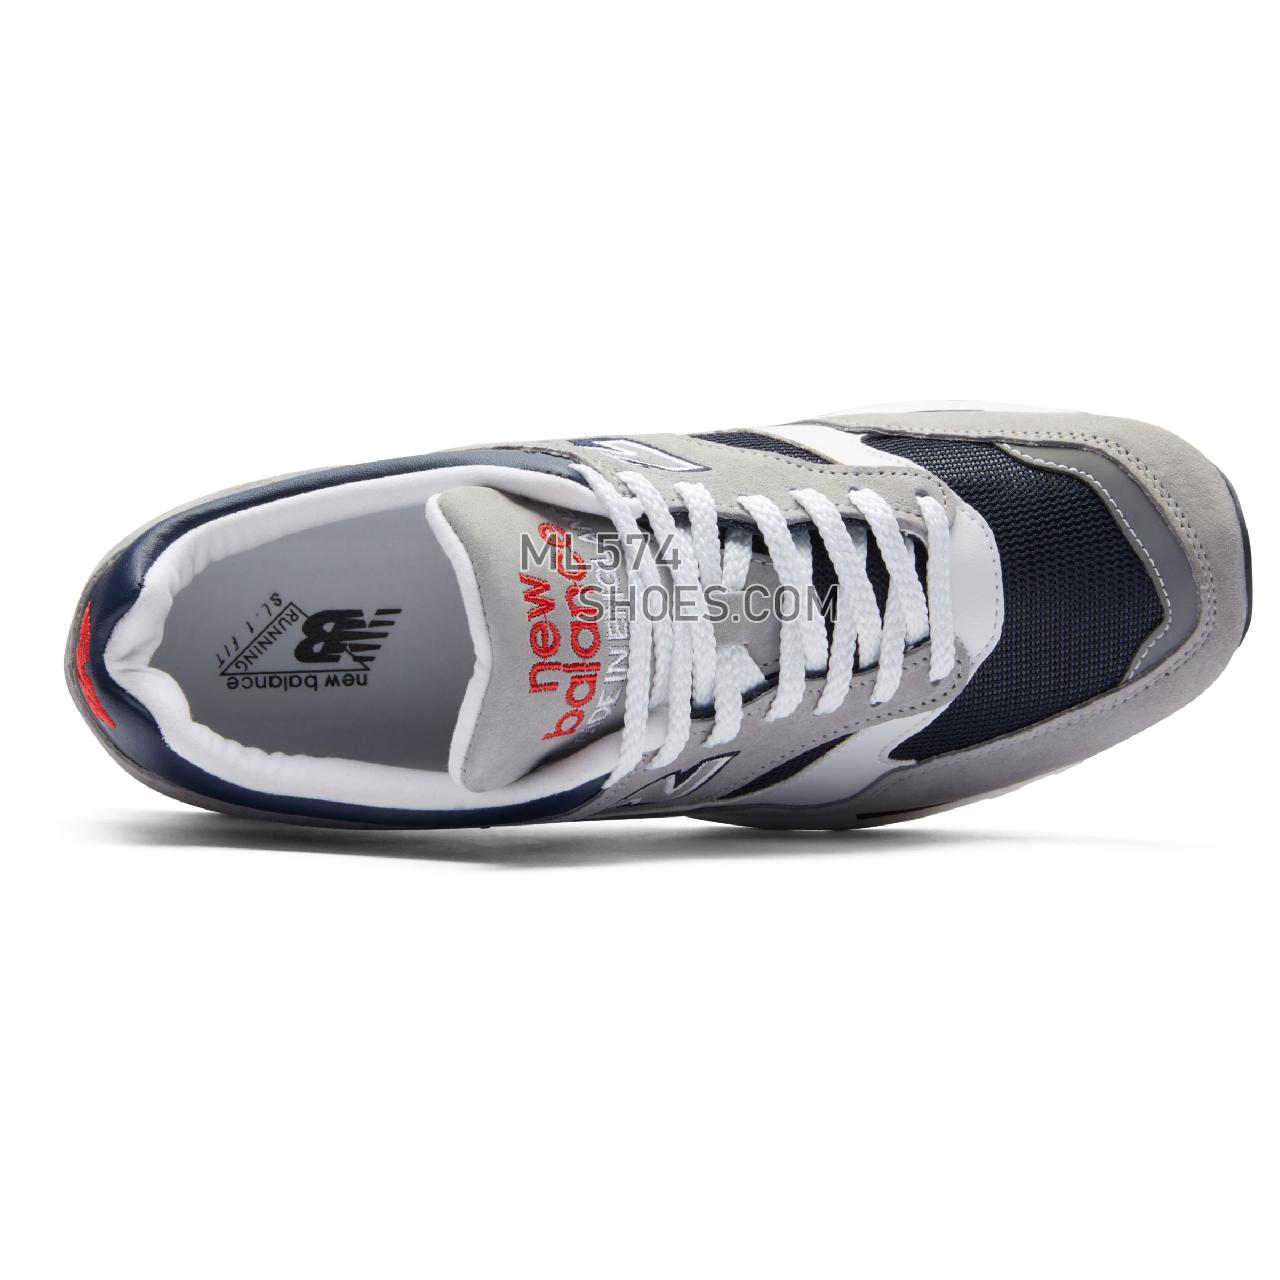 New Balance Made in UK 1500 - Men's Made in UK 1500 ML1500V1-23746-M - Grey with Navy and Red - M1500GNW